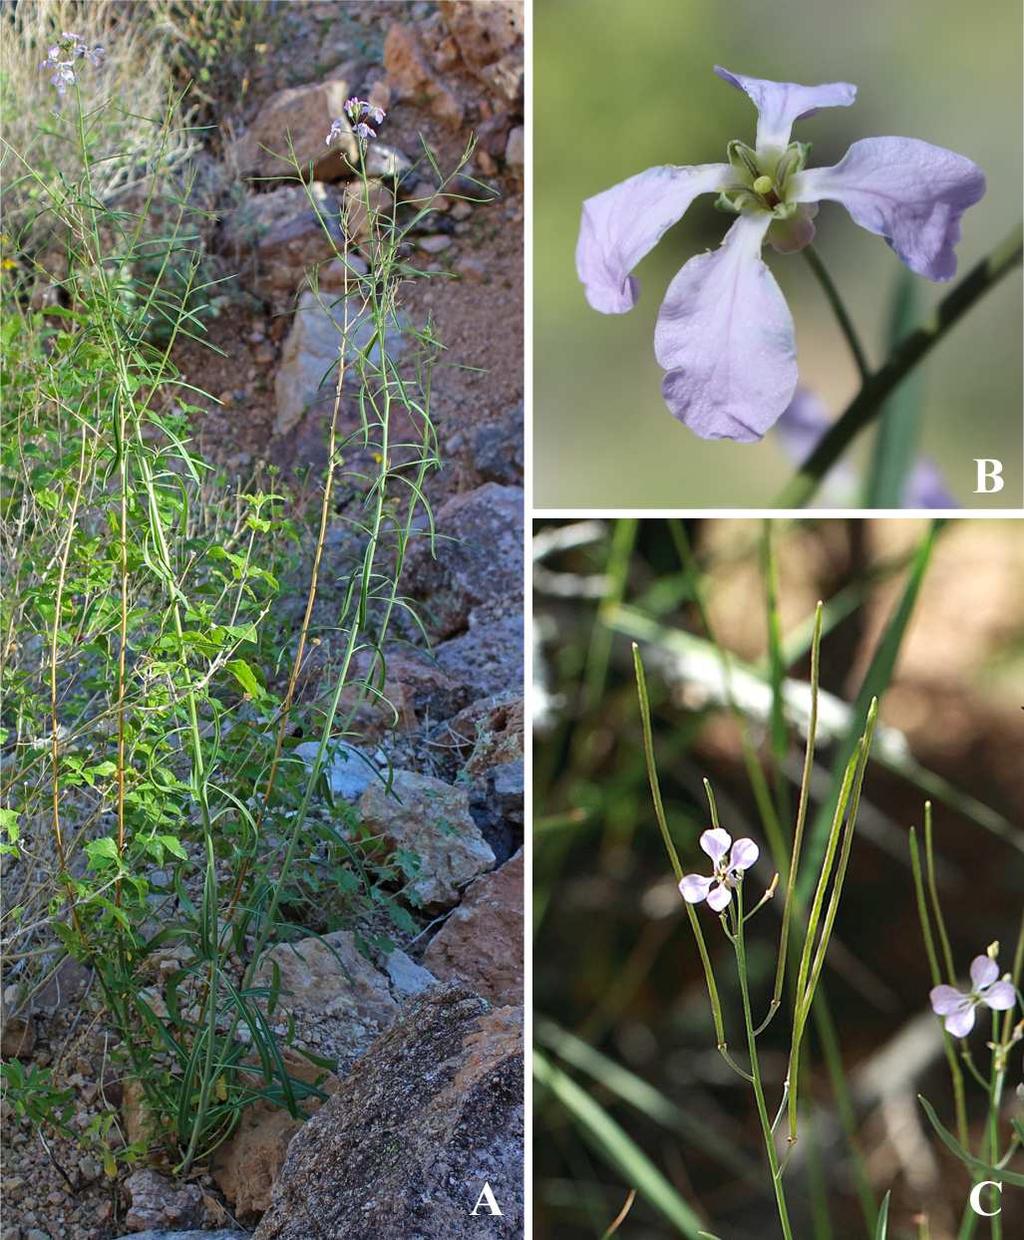 Felger et al.: Southwestern Arizona flora, Brassicaceae and Burseraceae 21 Glabrous, erect perennials to more than 2 m tall from a caudex. The stem leaves linear to lanceolate, 2.